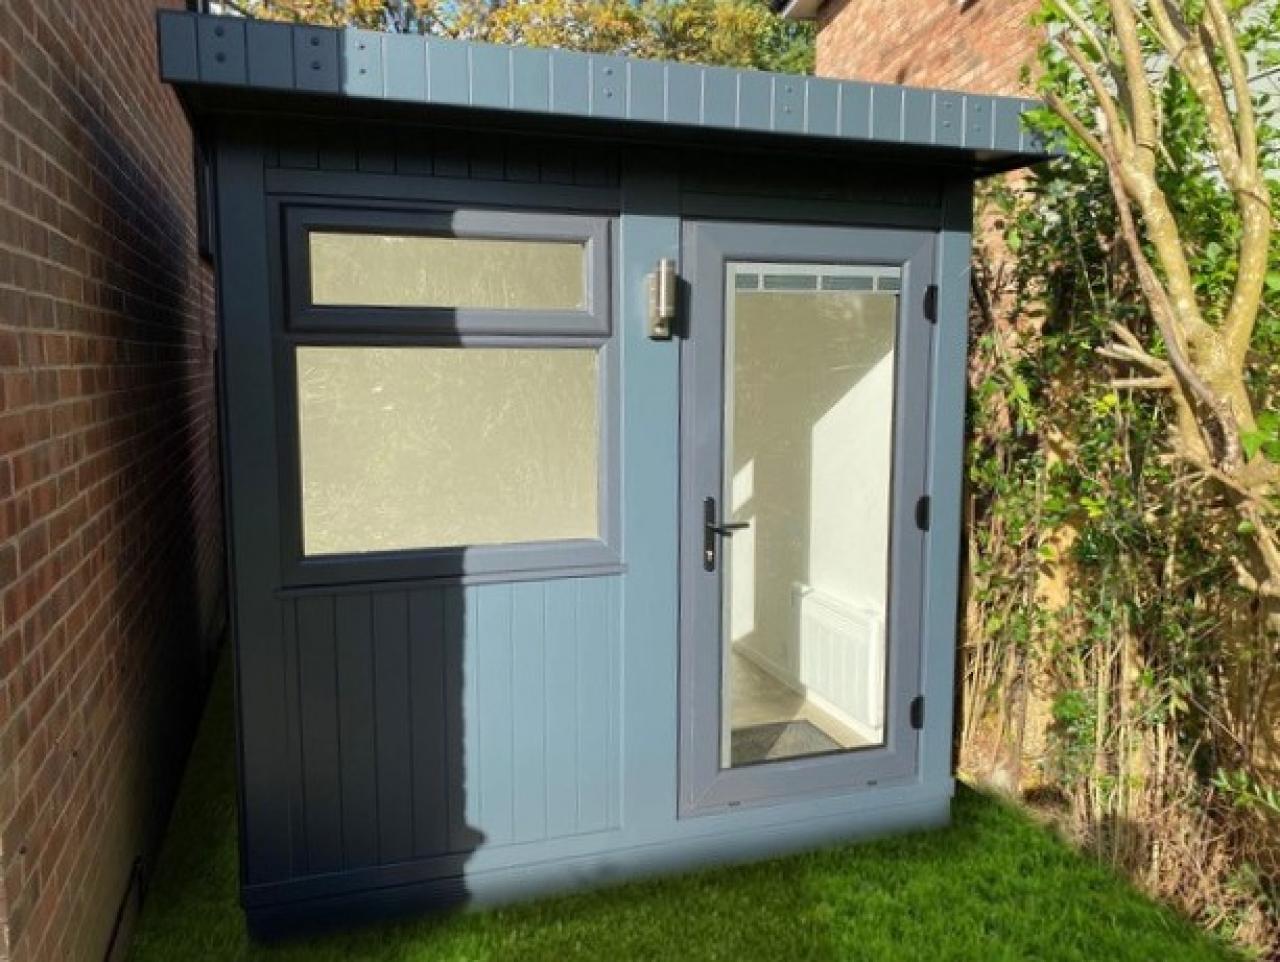 A selection of images for our New Small Garden Offices. You can have one ready to use in as little as 6 weeks from order. 
REF: SGO